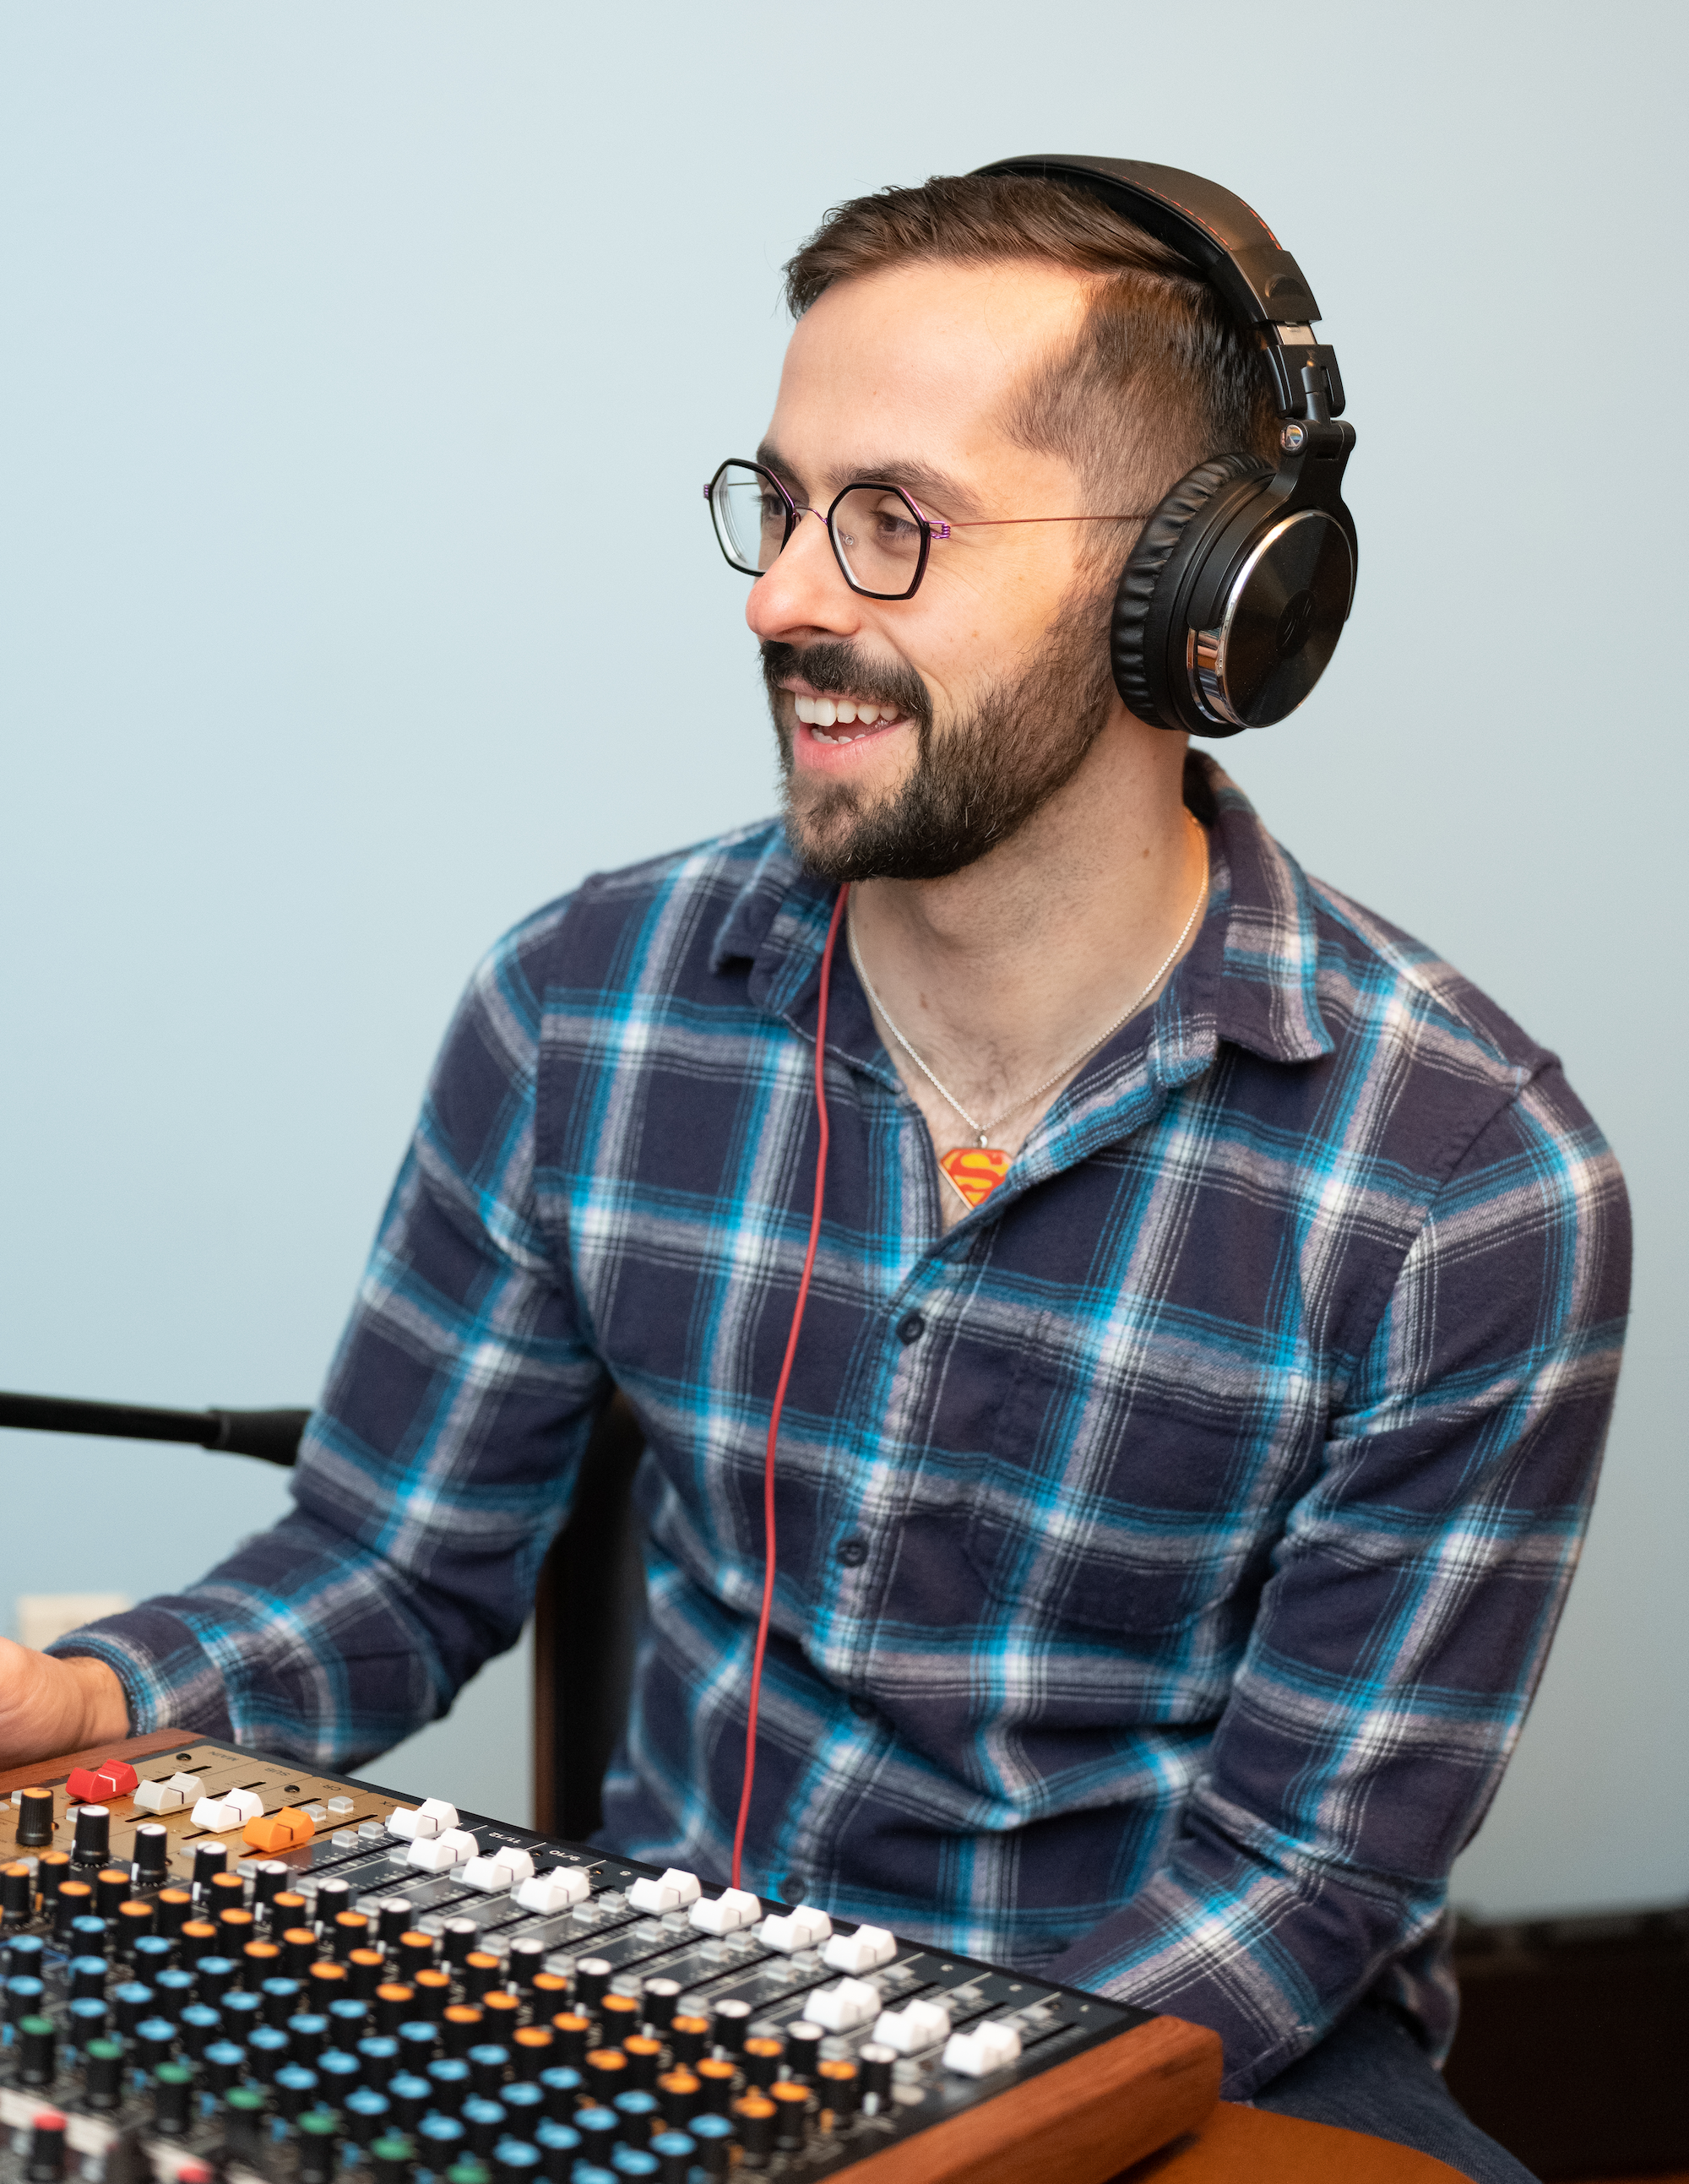 Derek is sitting in front of a soundboard wearing headphones. He's smiling and looking off camera. He wears a blue plaid button-down shirt.